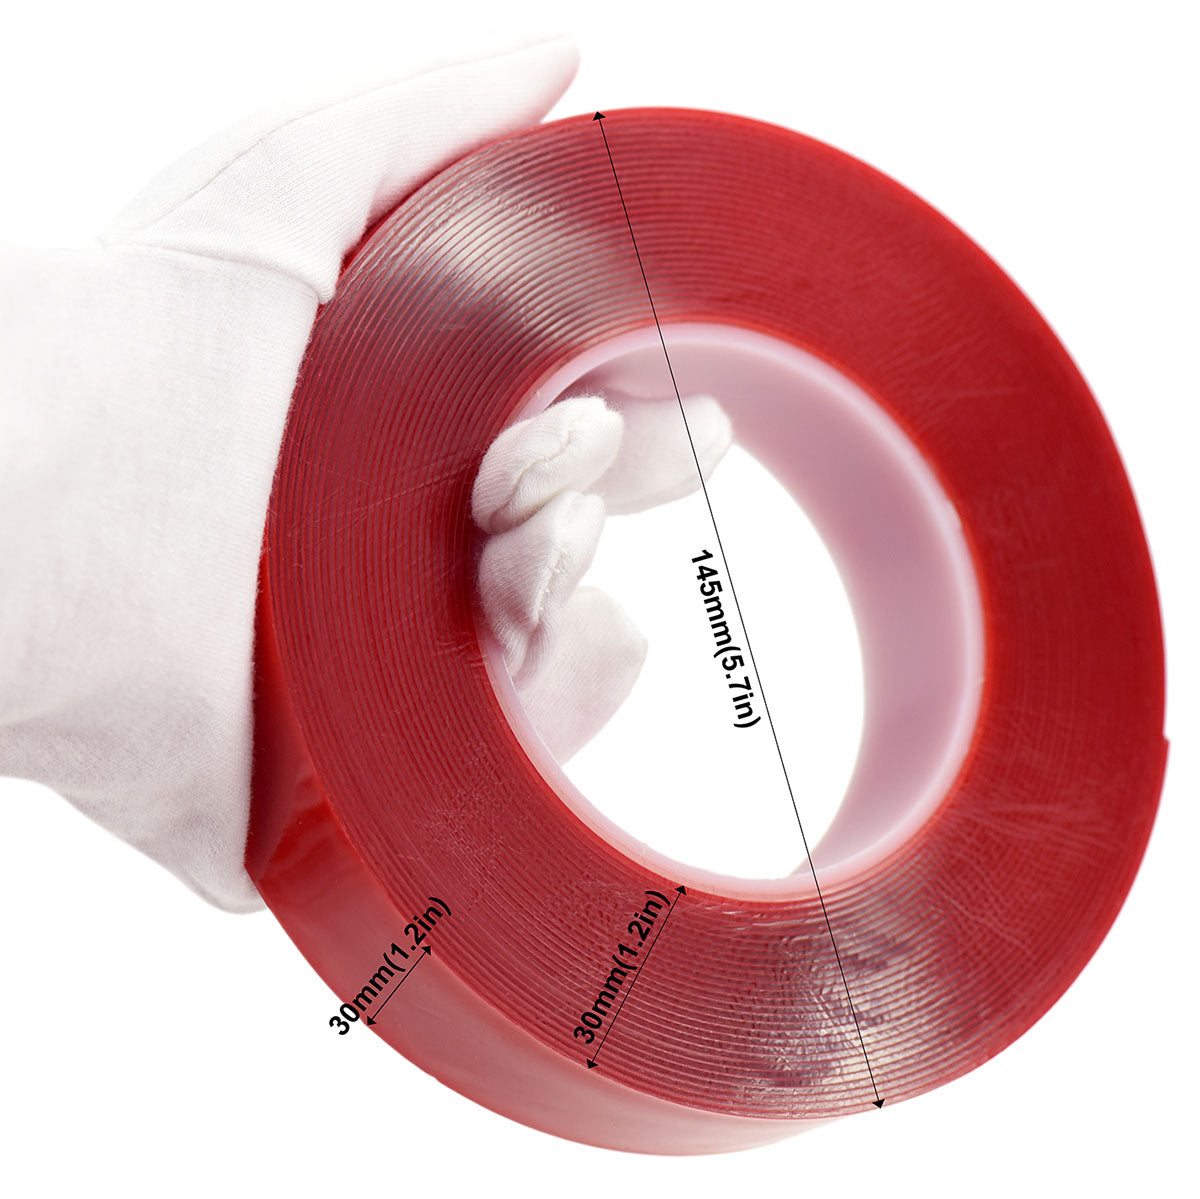 30mm x 1mm x 10 meters Multi-Purpose High Strength Transparent Acrylic Gel Adhesive Double Sided Tape Roll No Residue